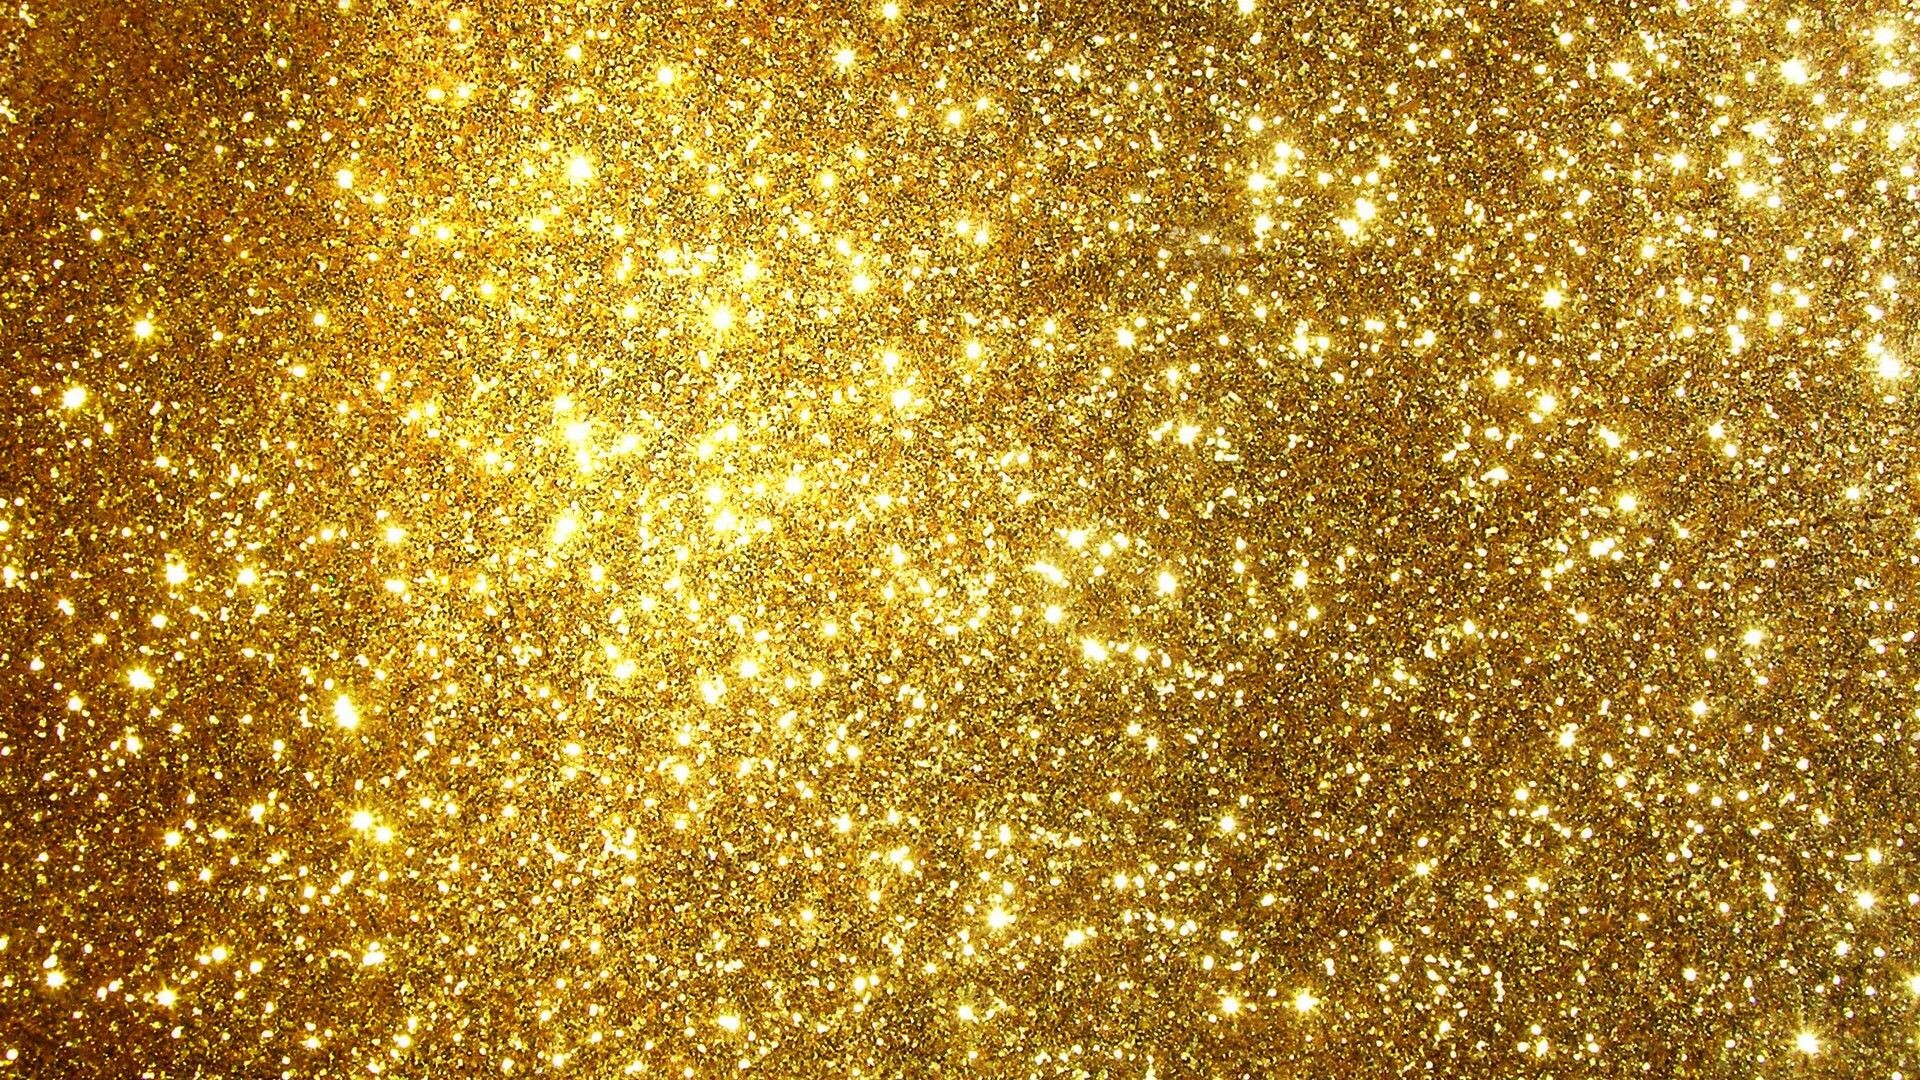 Gold Glitter: The solid surface decorated with shiny golden particles. 1920x1080 Full HD Background.